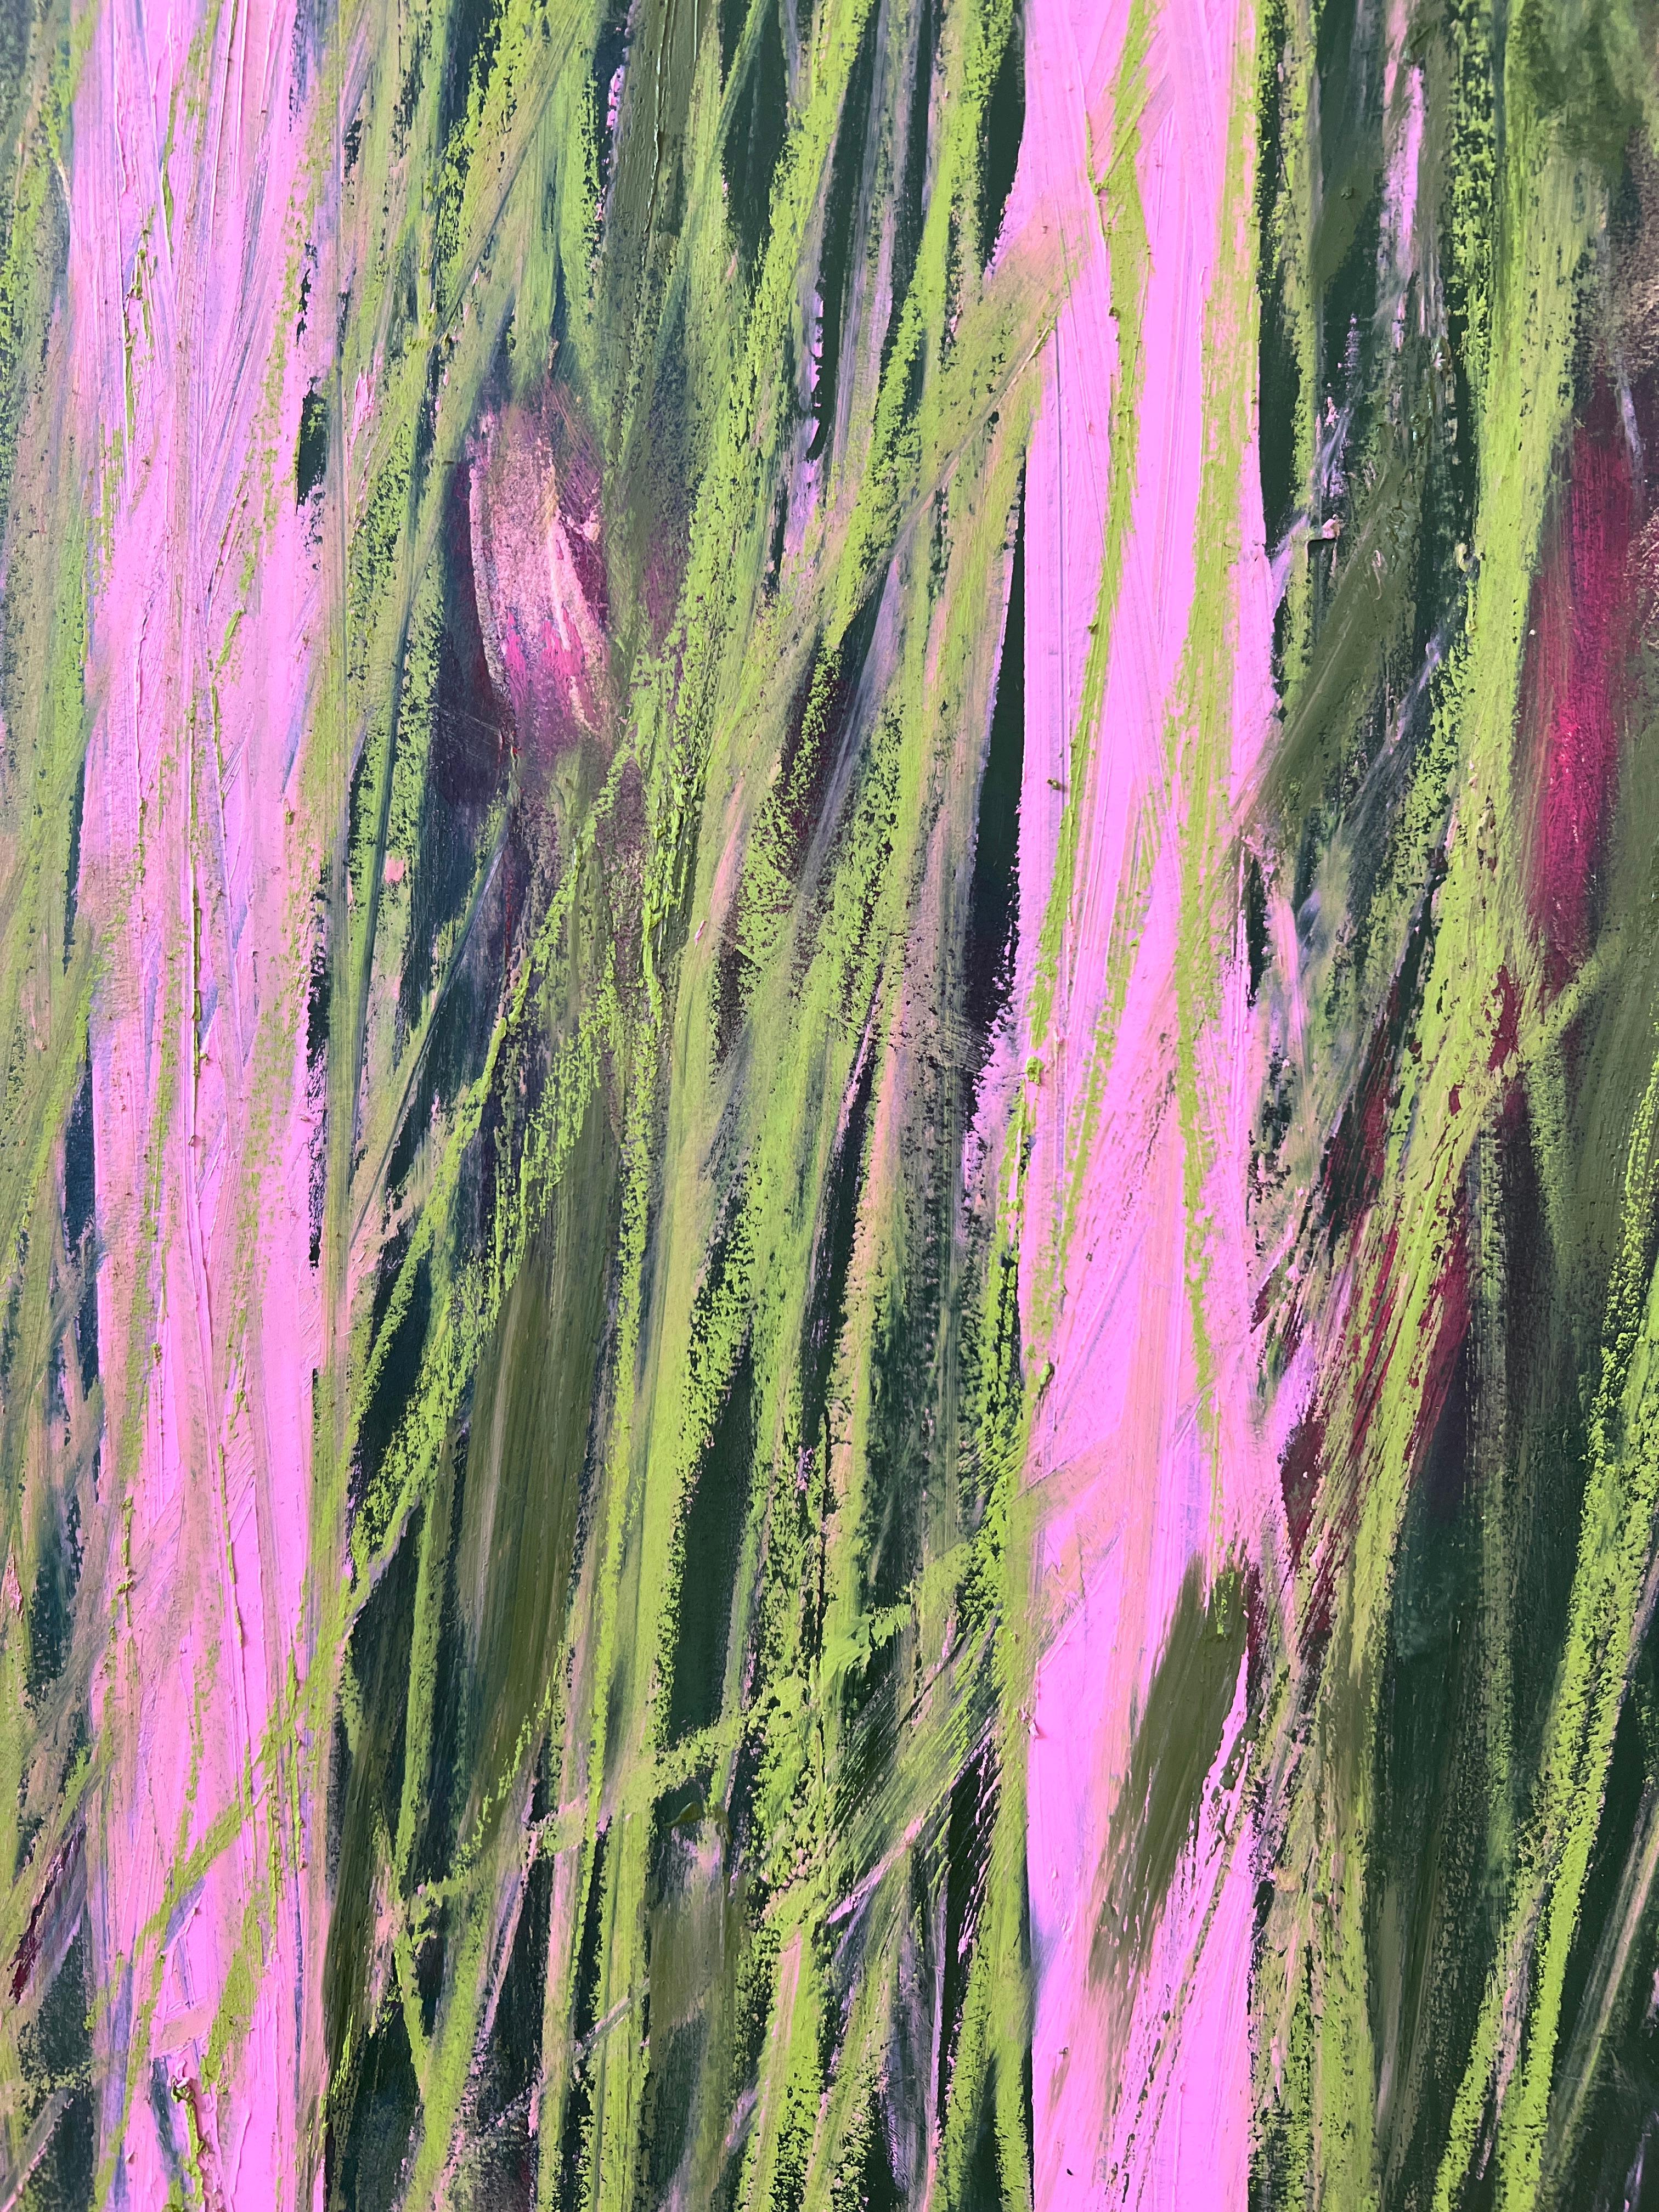 This is a new painting and part of my 'grasses' series.  I have been interested in the complexity of line this year having shifted from painting and drawing flowers in 2022.  My goal was to add mystery and movement in a blaze of color.  I want the